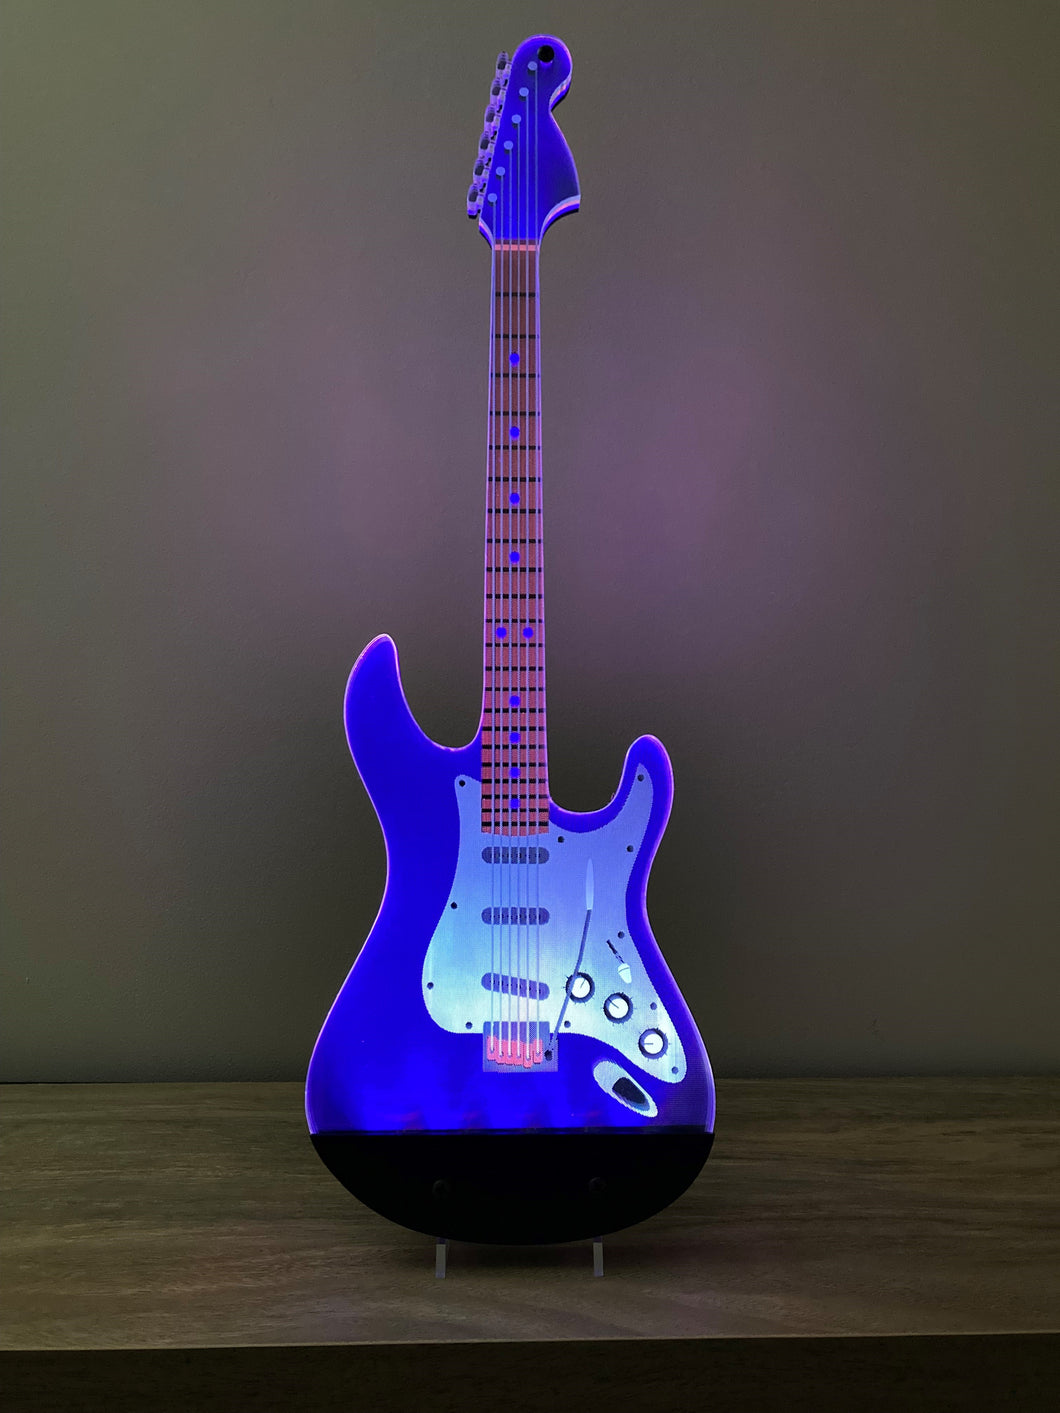 Electric Guitar #1 Light Display - Inspired by the Fender Stratocaster